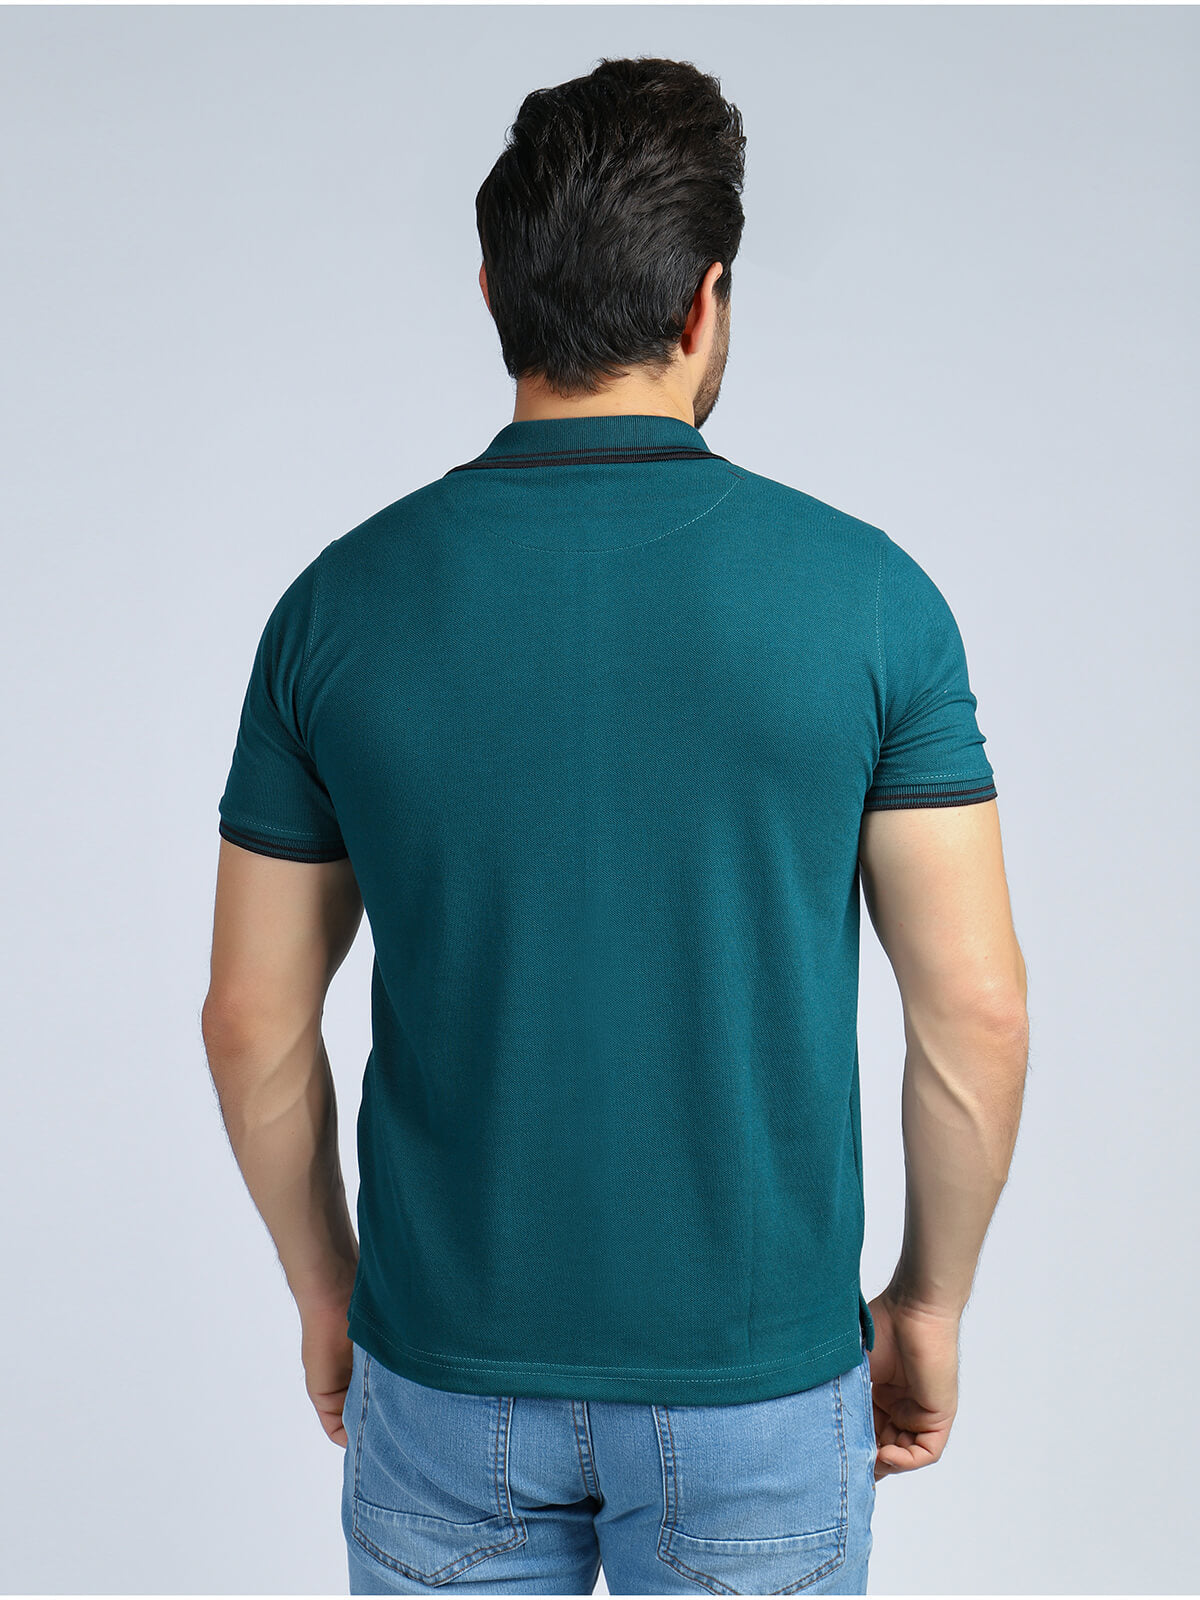 Turquoise Plain Contrast Tipping Half Sleeves Polo T-Shirt (POLO-530)